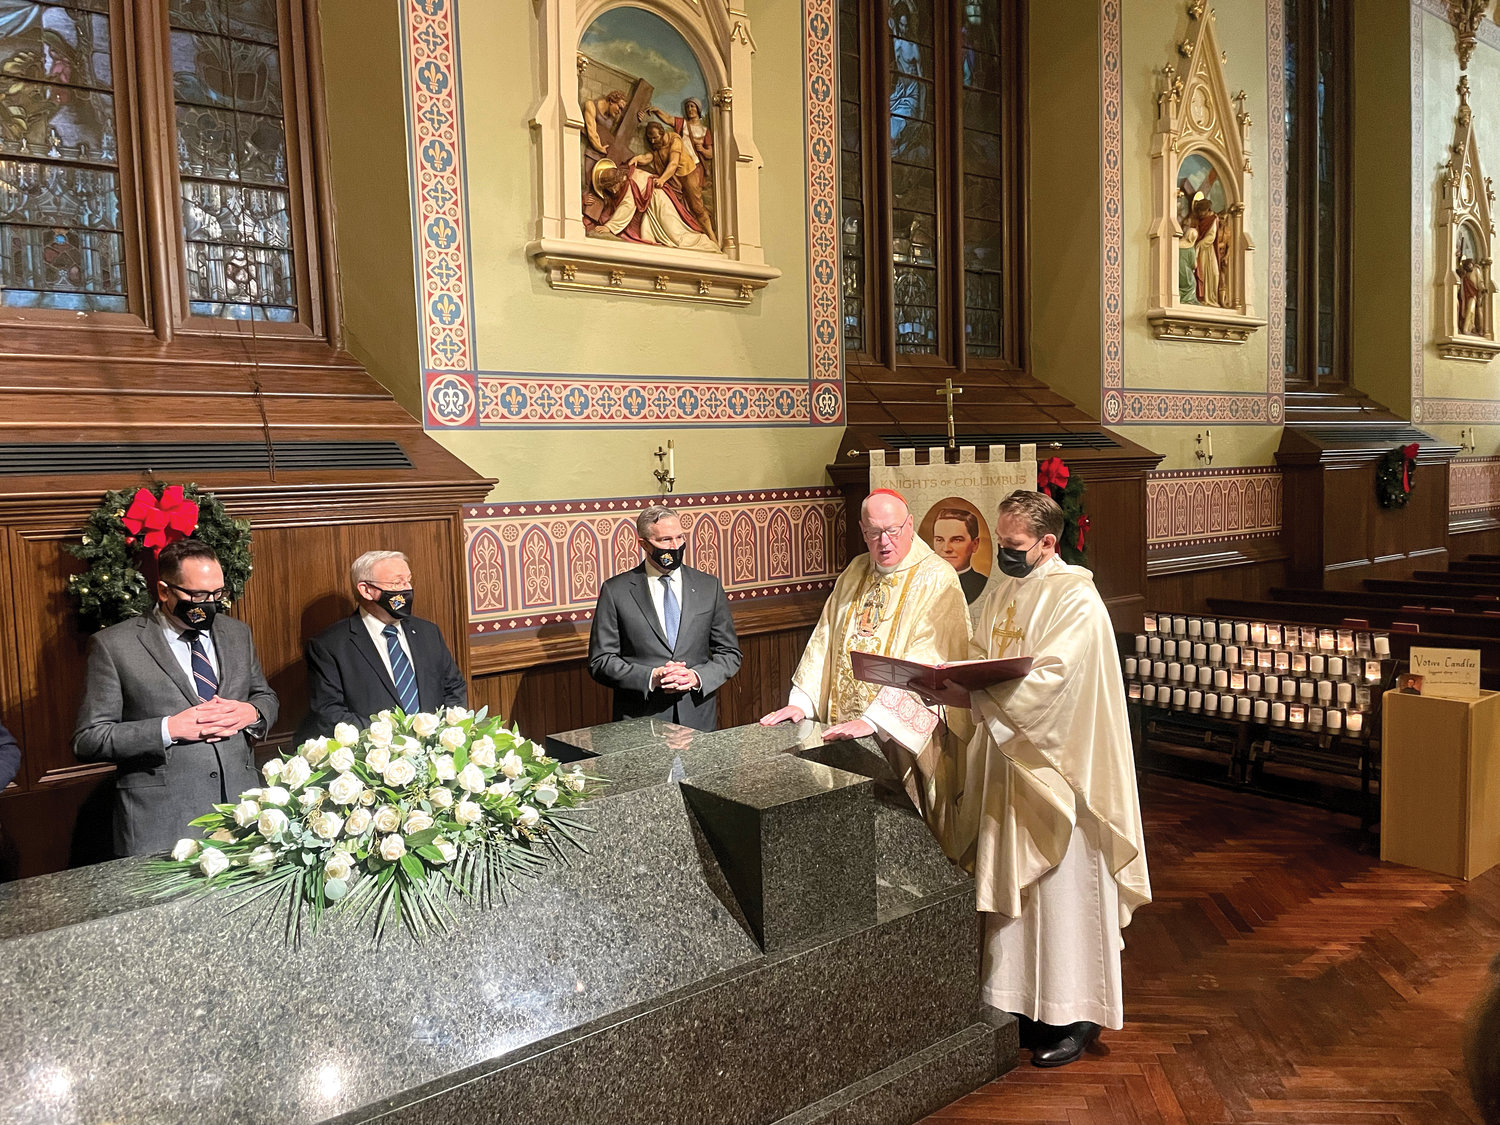 Cardinal Dolan leads those present in the Prayer for Canonization at the tomb of Blessed Michael McGivney. He entrusted to Blessed Michael McGivney’s intercession the intentions of parish priests serving in the Archdiocese of New York.